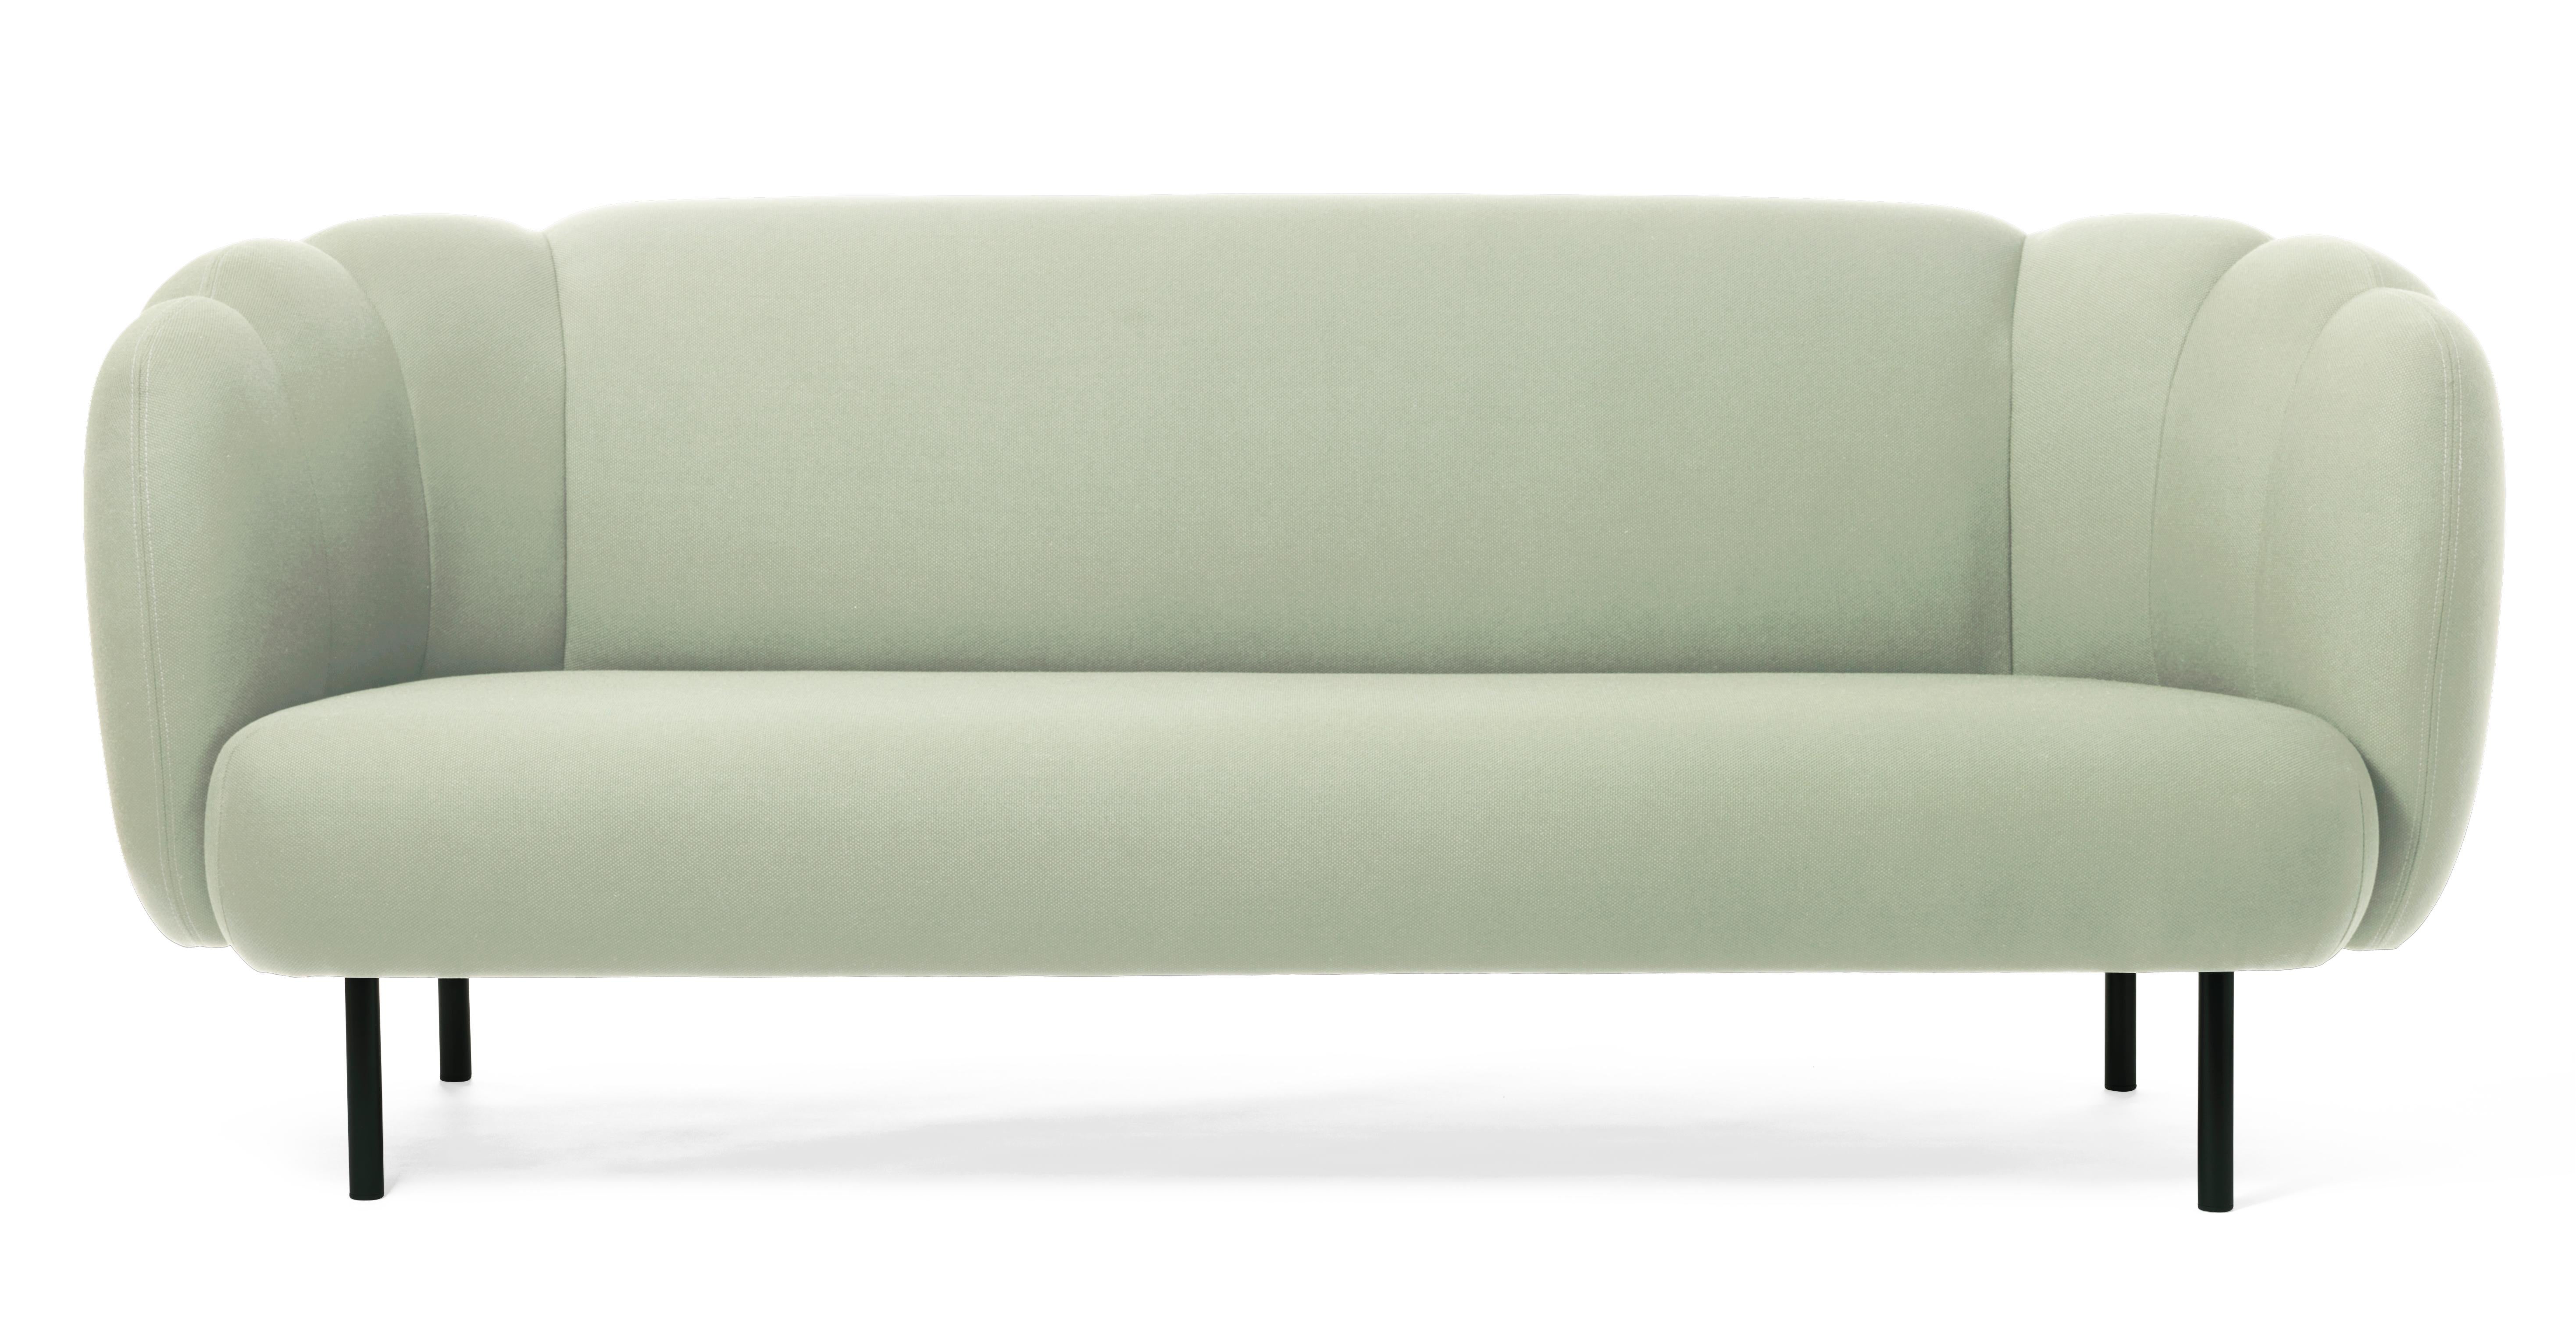 For Sale: Gray (Steelcut 935) Cape 3-Seat Stitch Sofa, by Charlotte Høncke from Warm Nordic